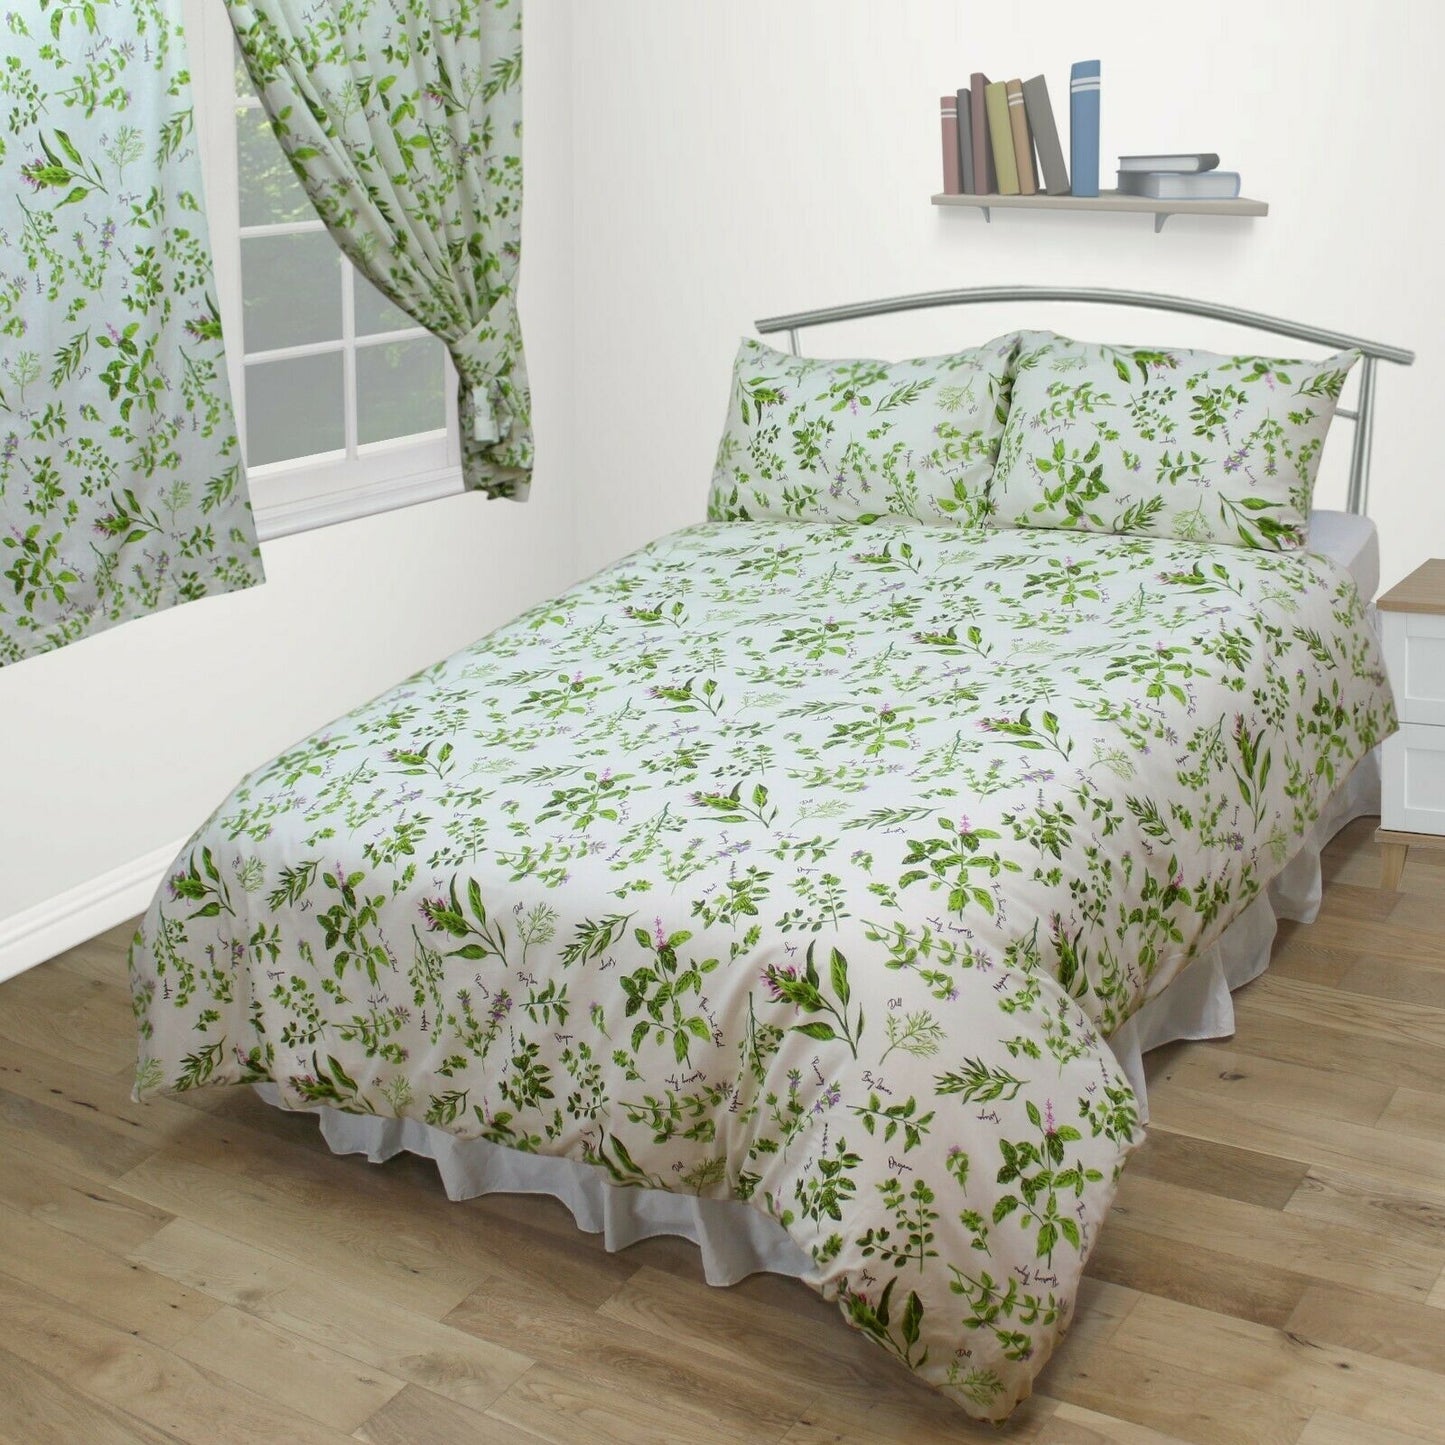 Double Bed Herb Garden Thyme Flowers Cream Duvet Cover Set 100% Natural Cotton